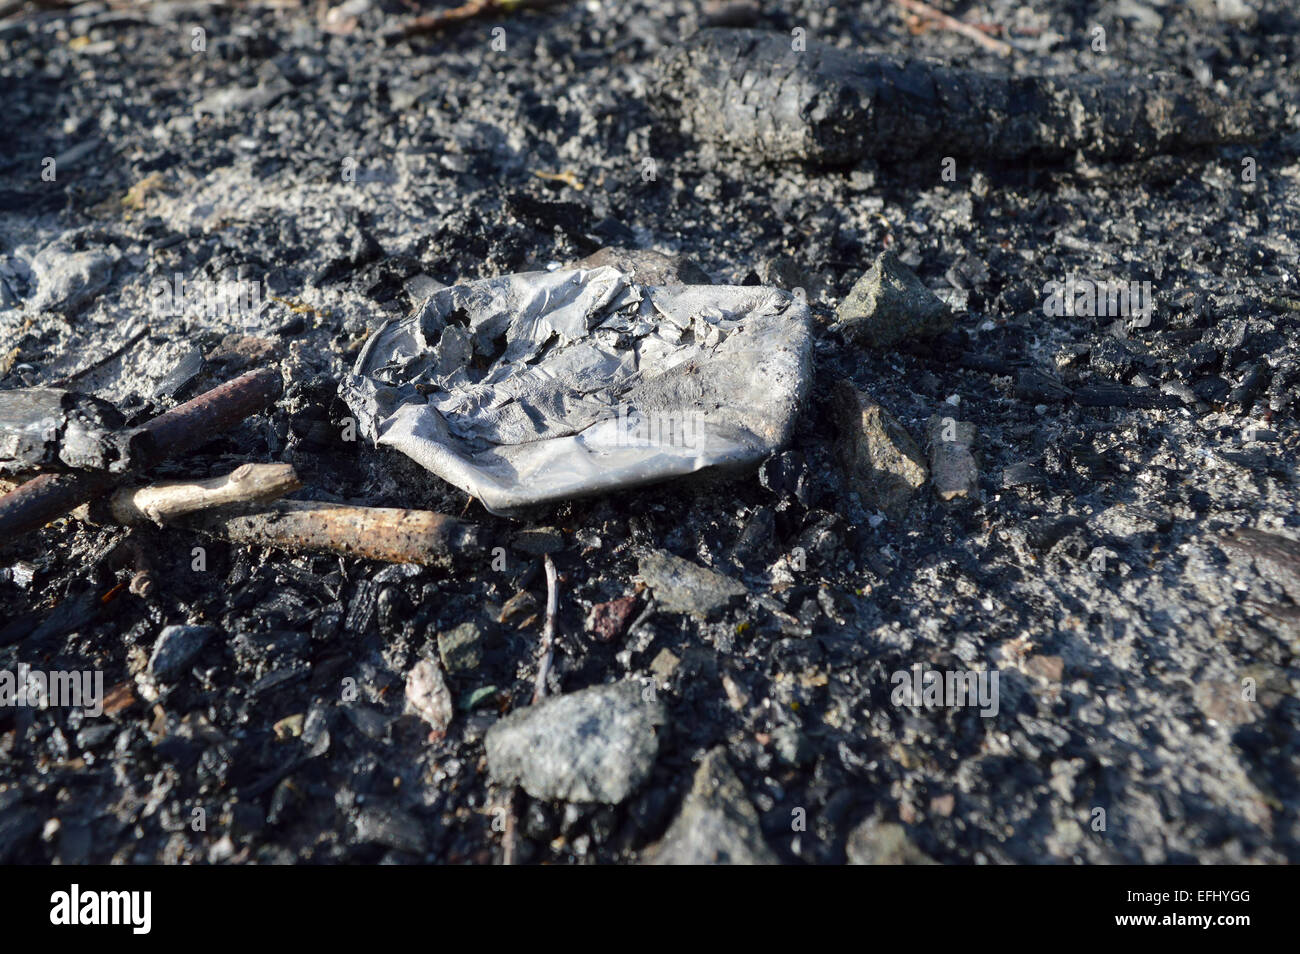 Close up of discarded burnt rubbish left on the floor outdoors. Stock Photo